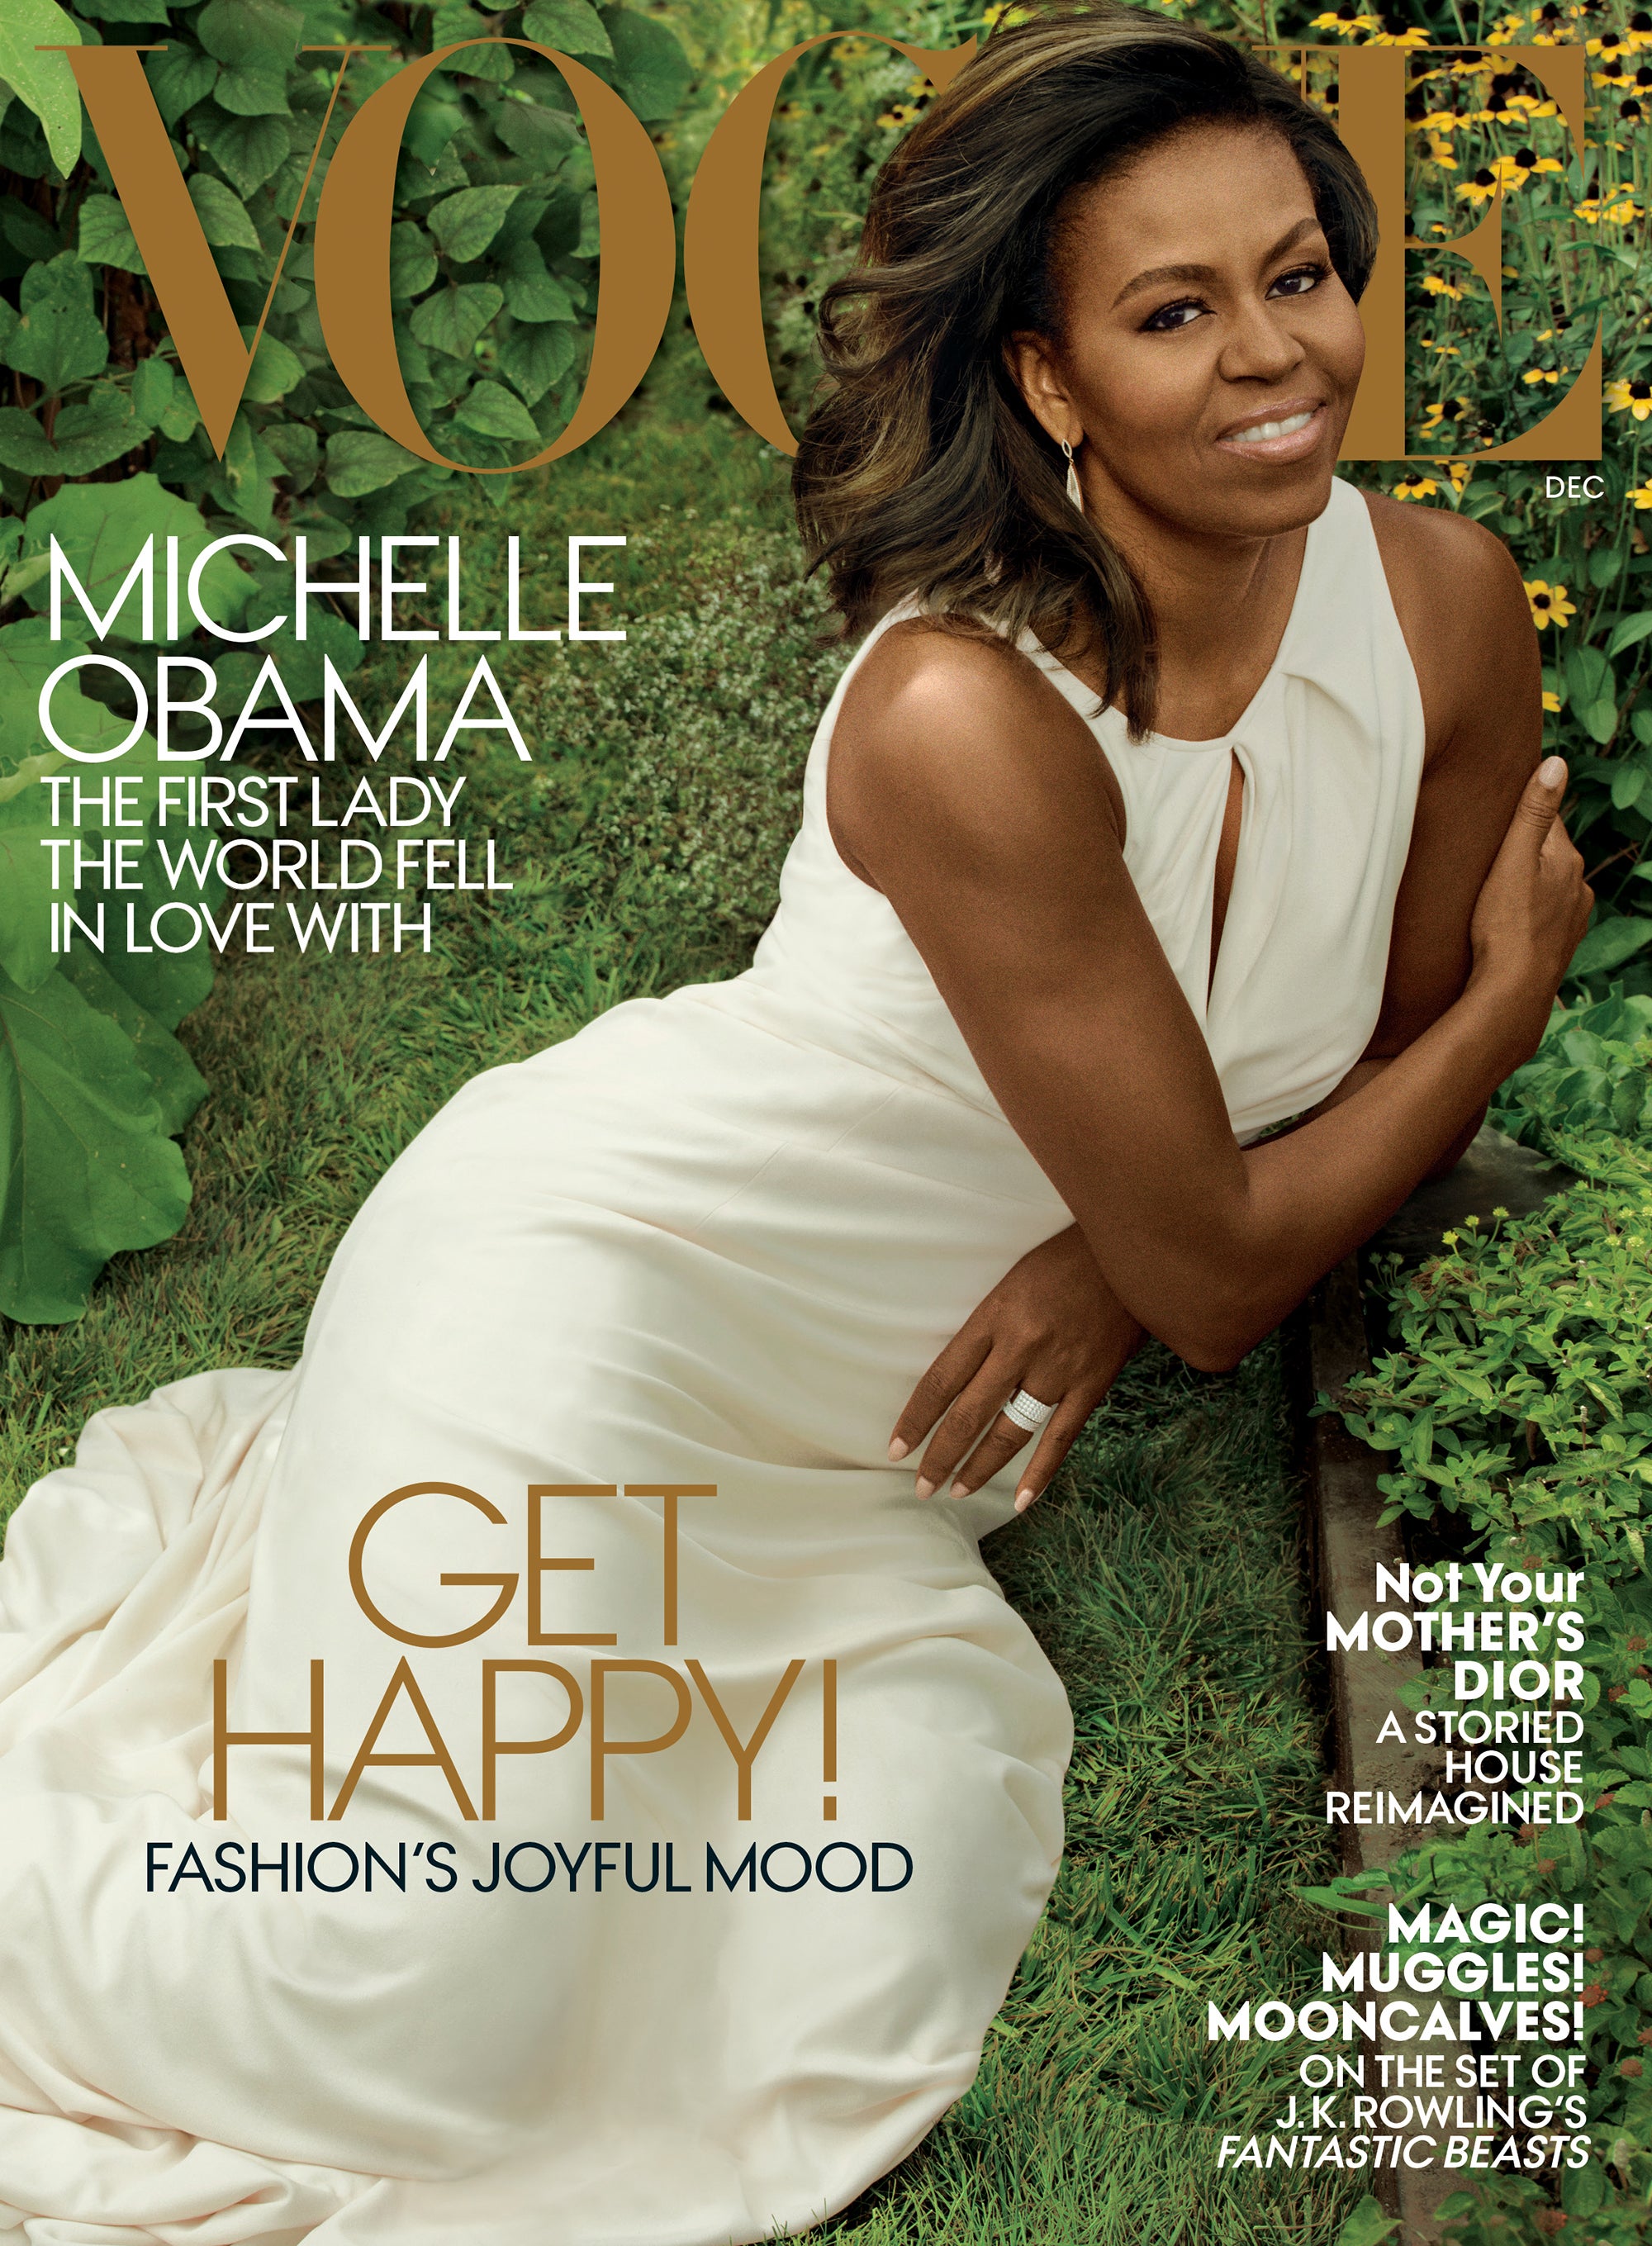 Get Into This: Michelle Obama Serves Up Her Last Vogue Slay As First Lady
